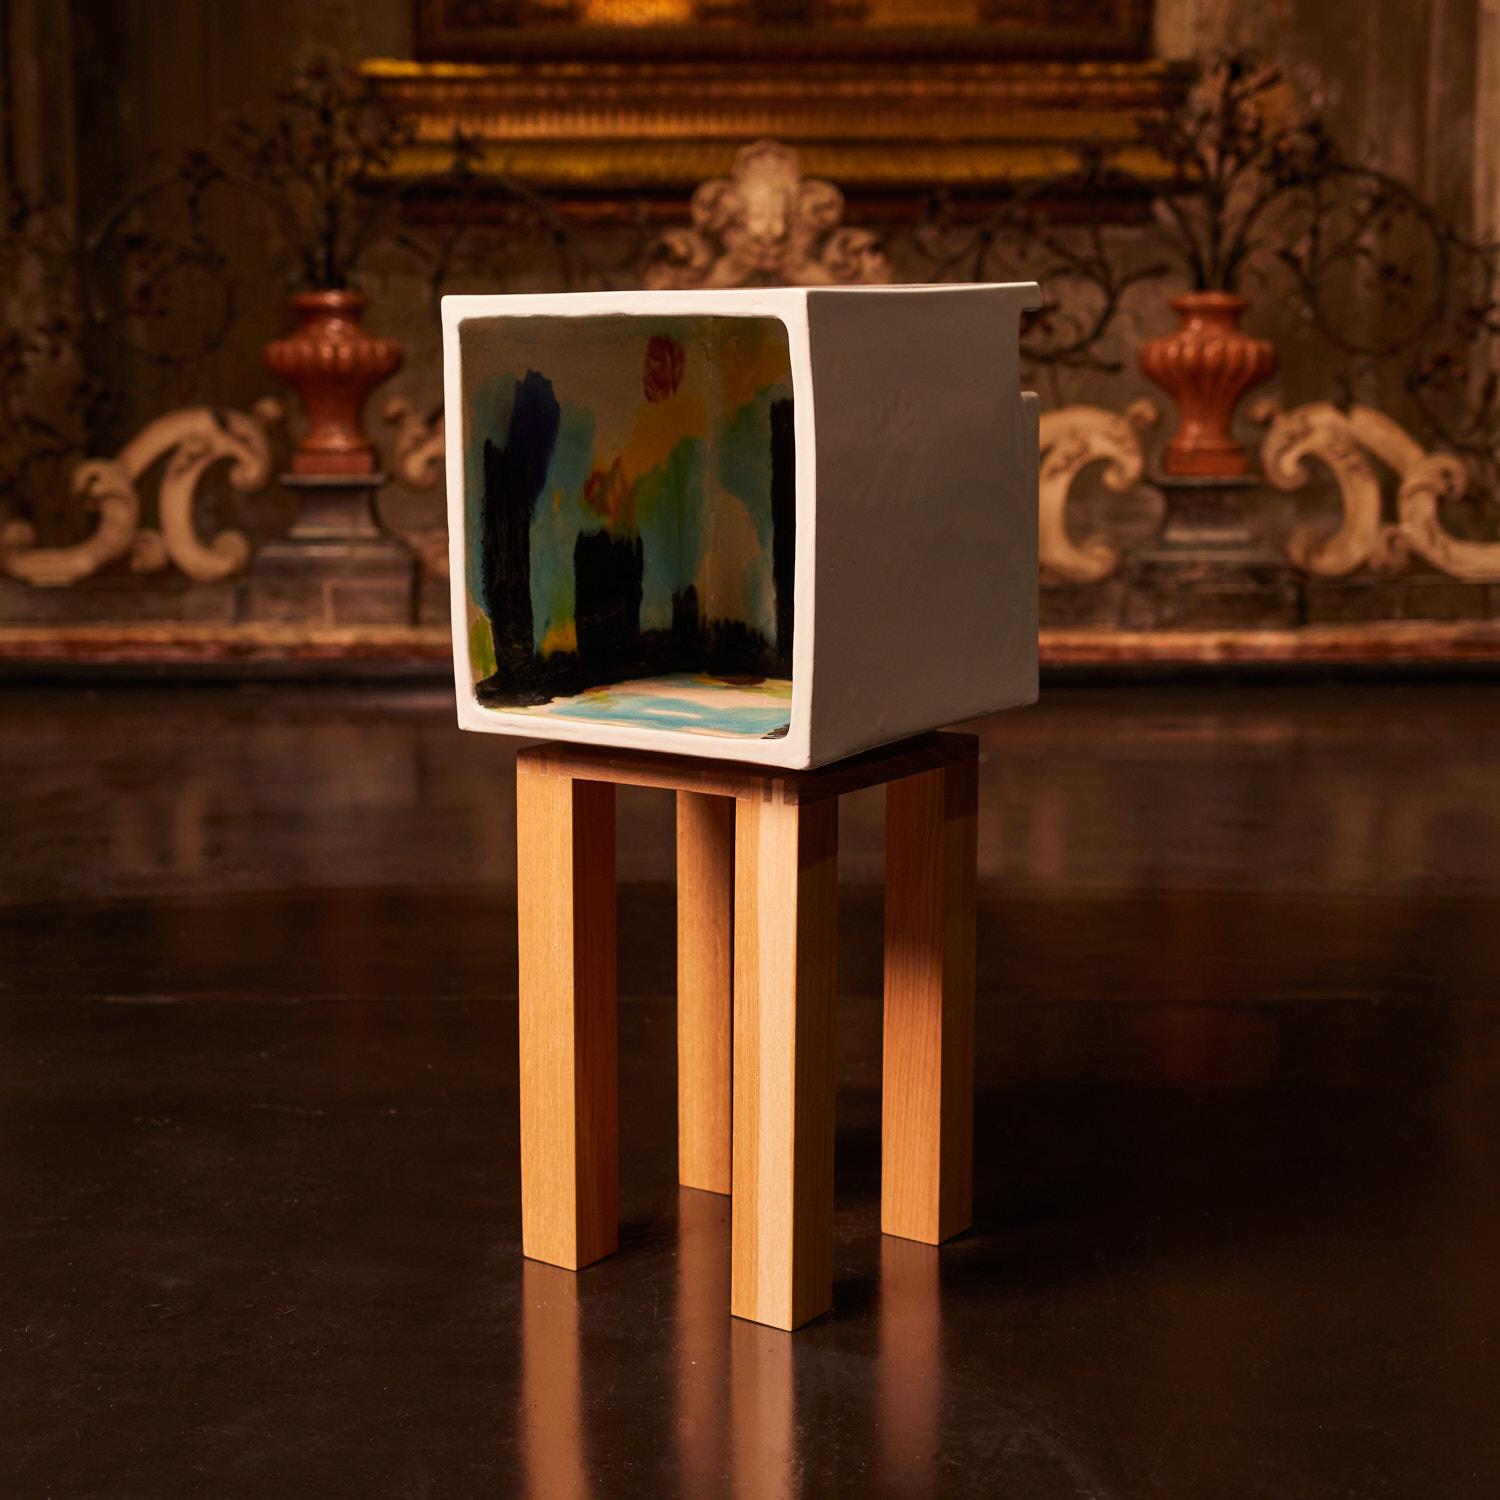 InQuadrato is a series of open cabinets, intended to be used as bed sides, offered in three different heights, each one is a unique piece painted by the artist. Sturdy and pictorial in taste, these ceramic cube cabinets presents considerable